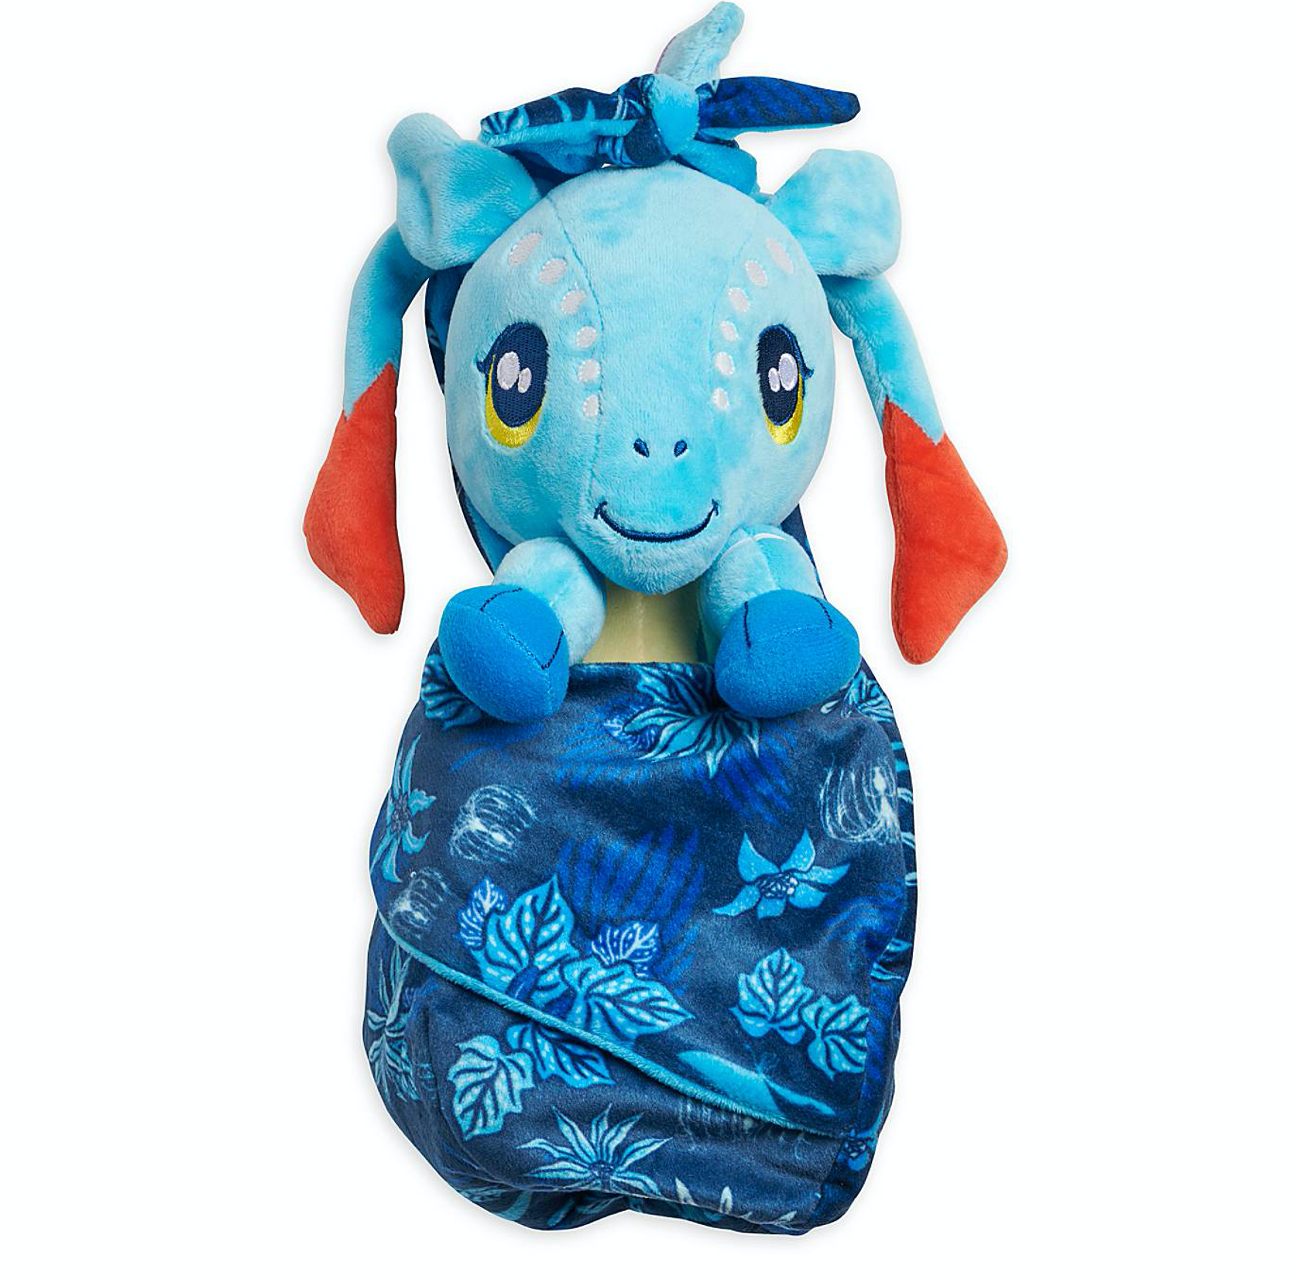 Disney Parks Baby Pandora Avatar Direhorse in Blanket Pouch Plush New with Tags